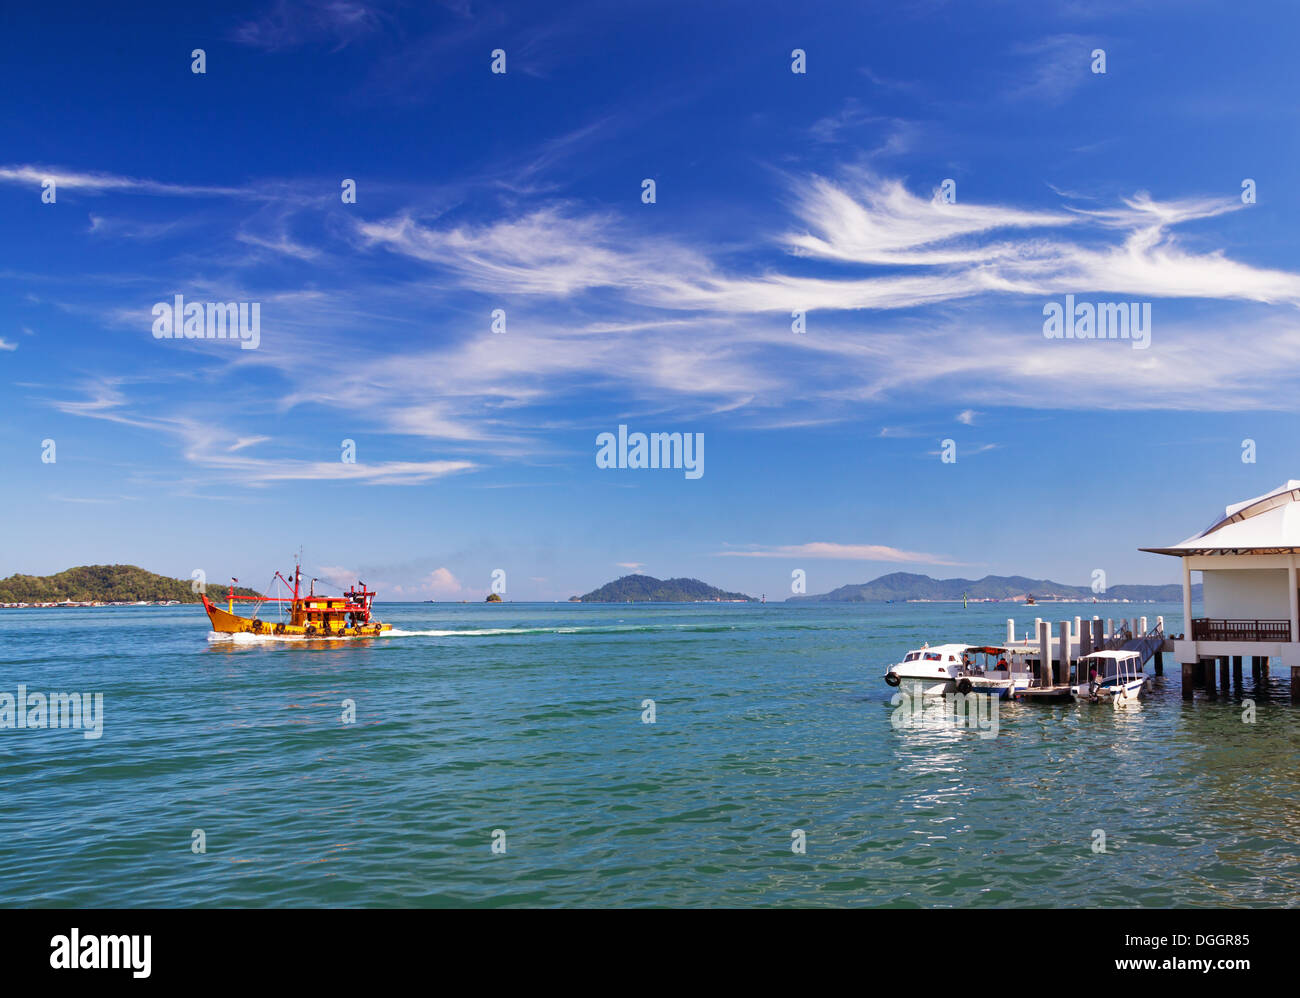 Seascape with boats and picturesque clouds. Borneo island, Malaysia. Stock Photo